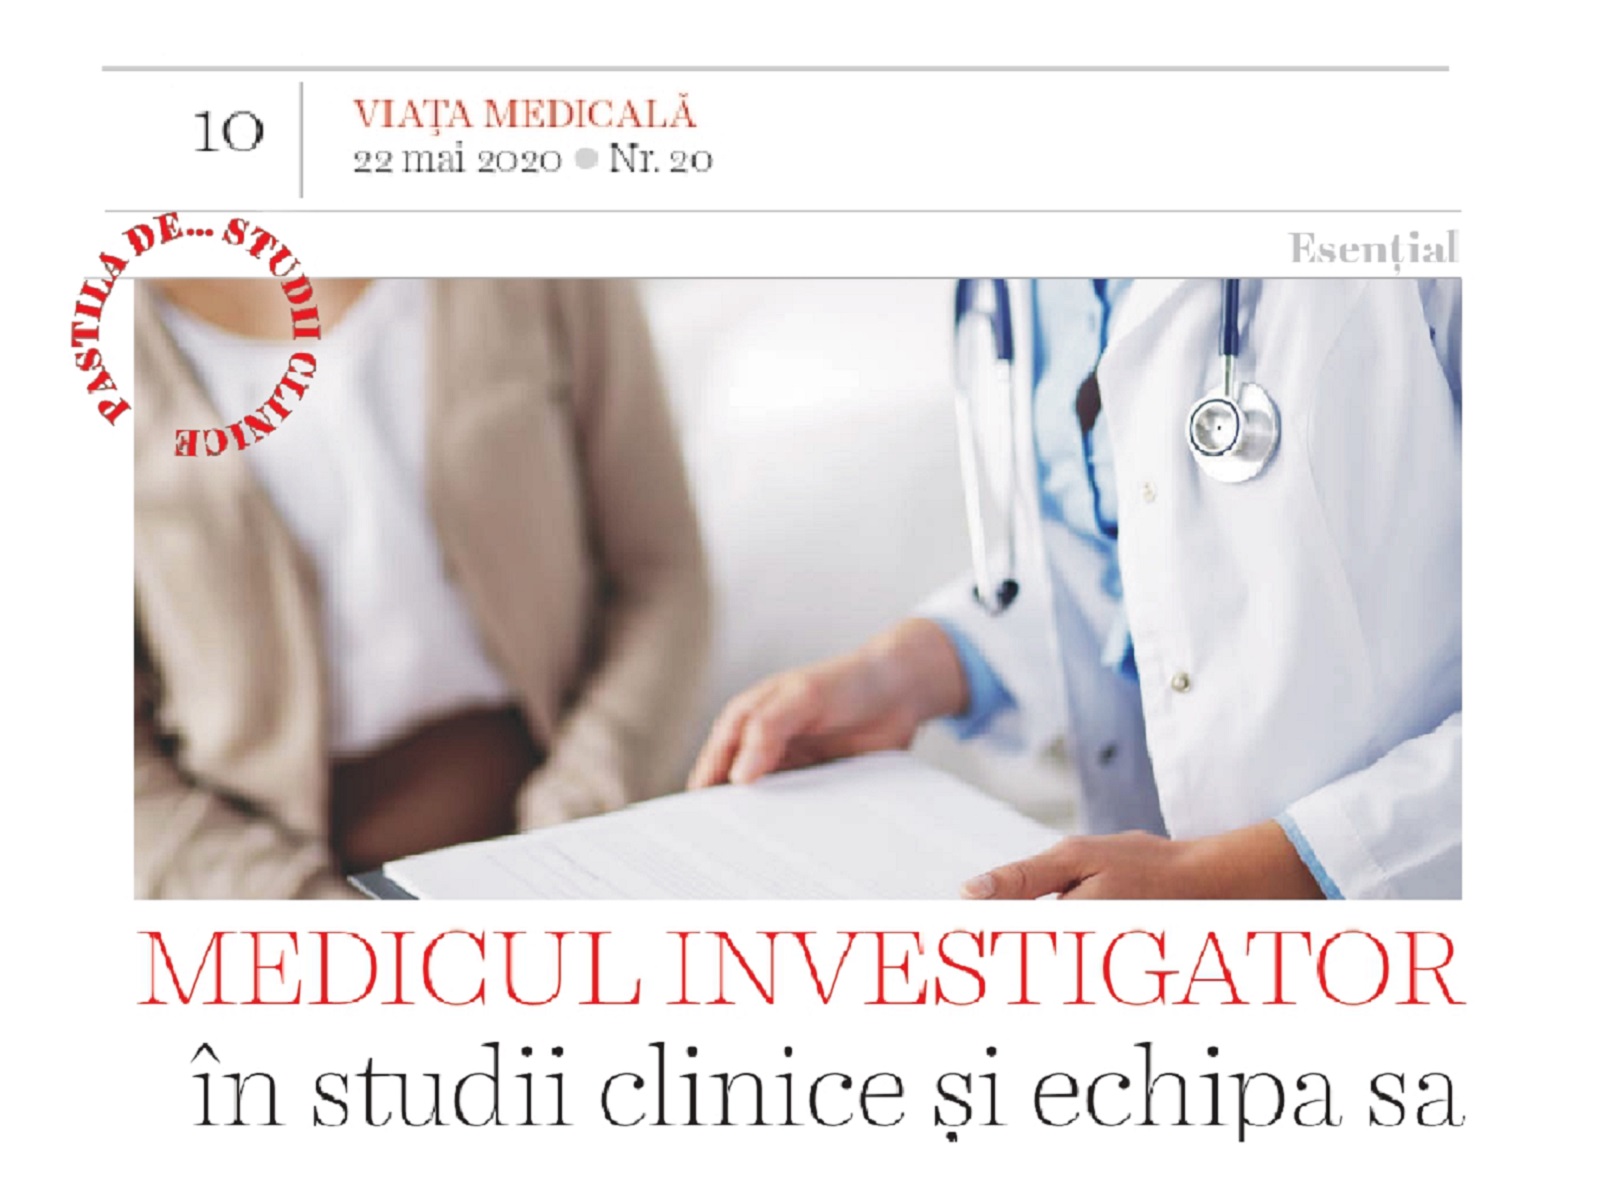 The medical investigator and his team, an interview in Viata Medicala Magazine